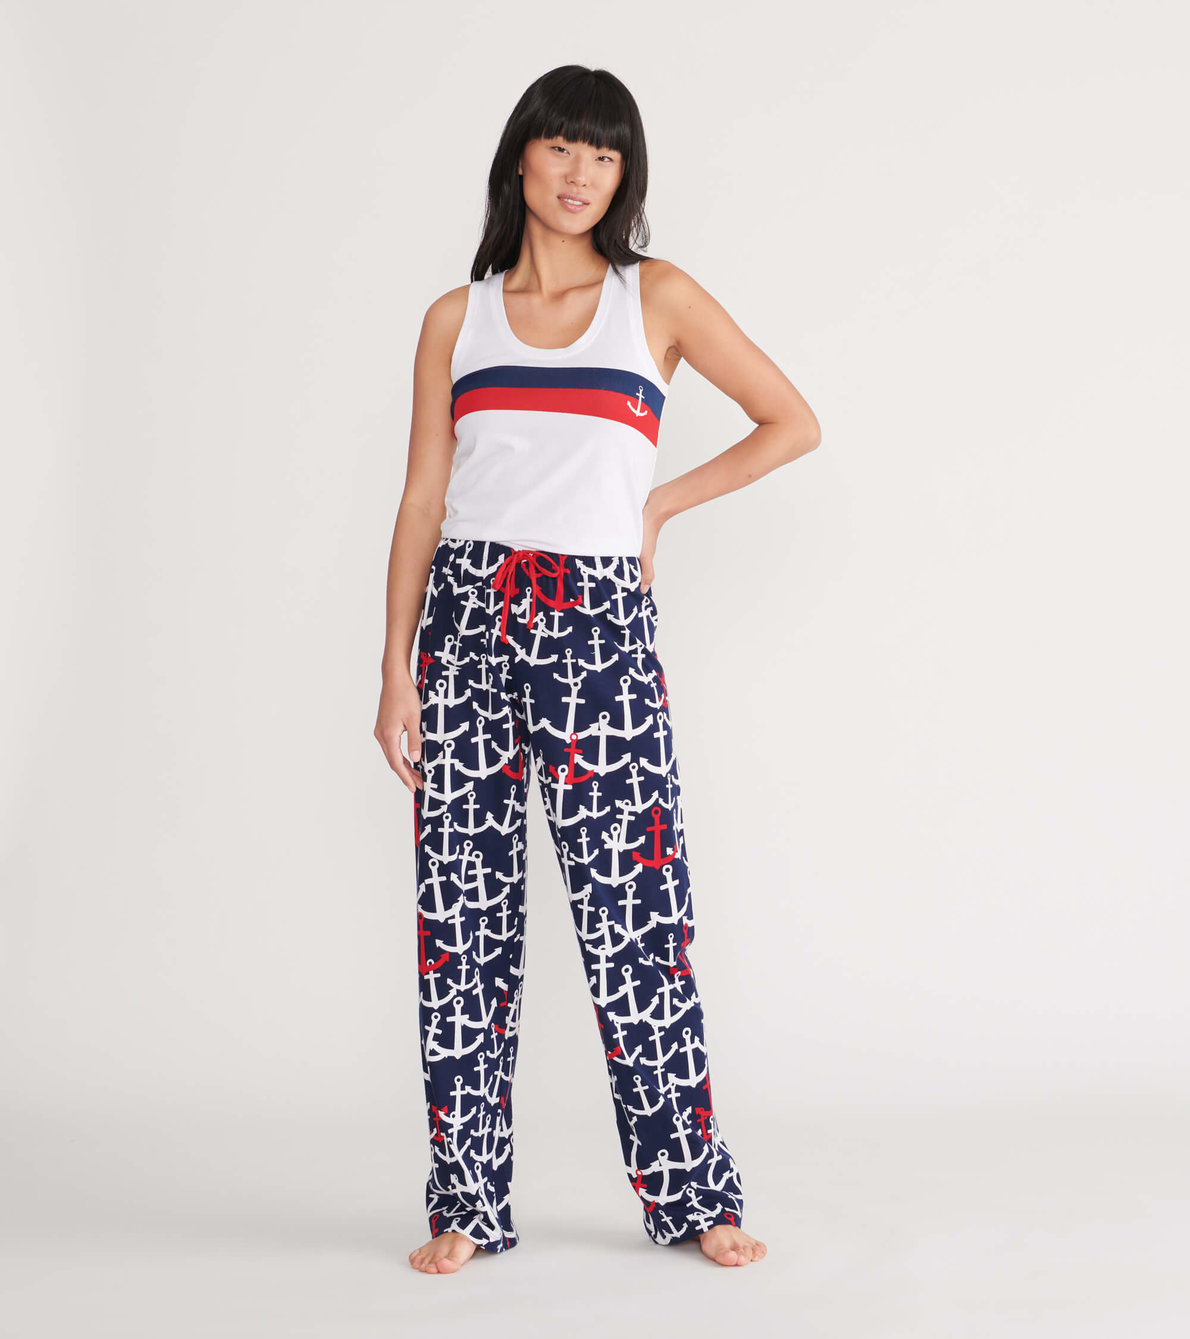 View larger image of Red and White Anchors Women's Jersey Pajama Pants